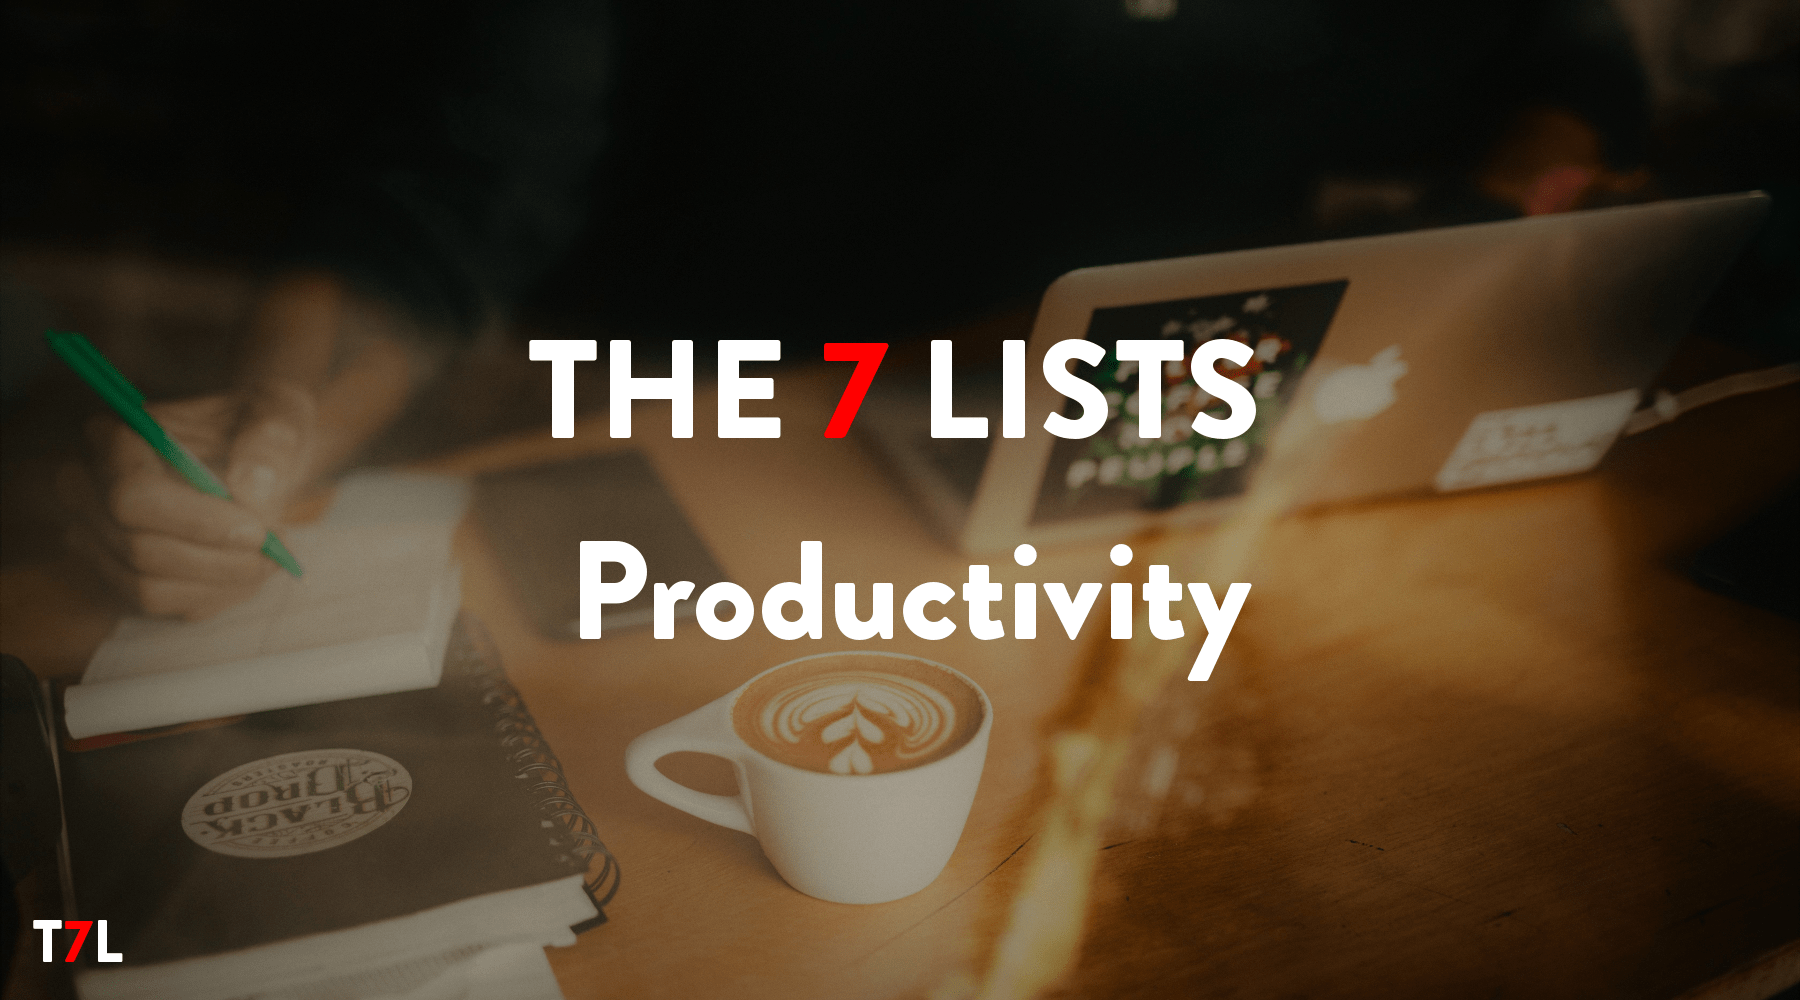 THE 7 LISTS_Productivity